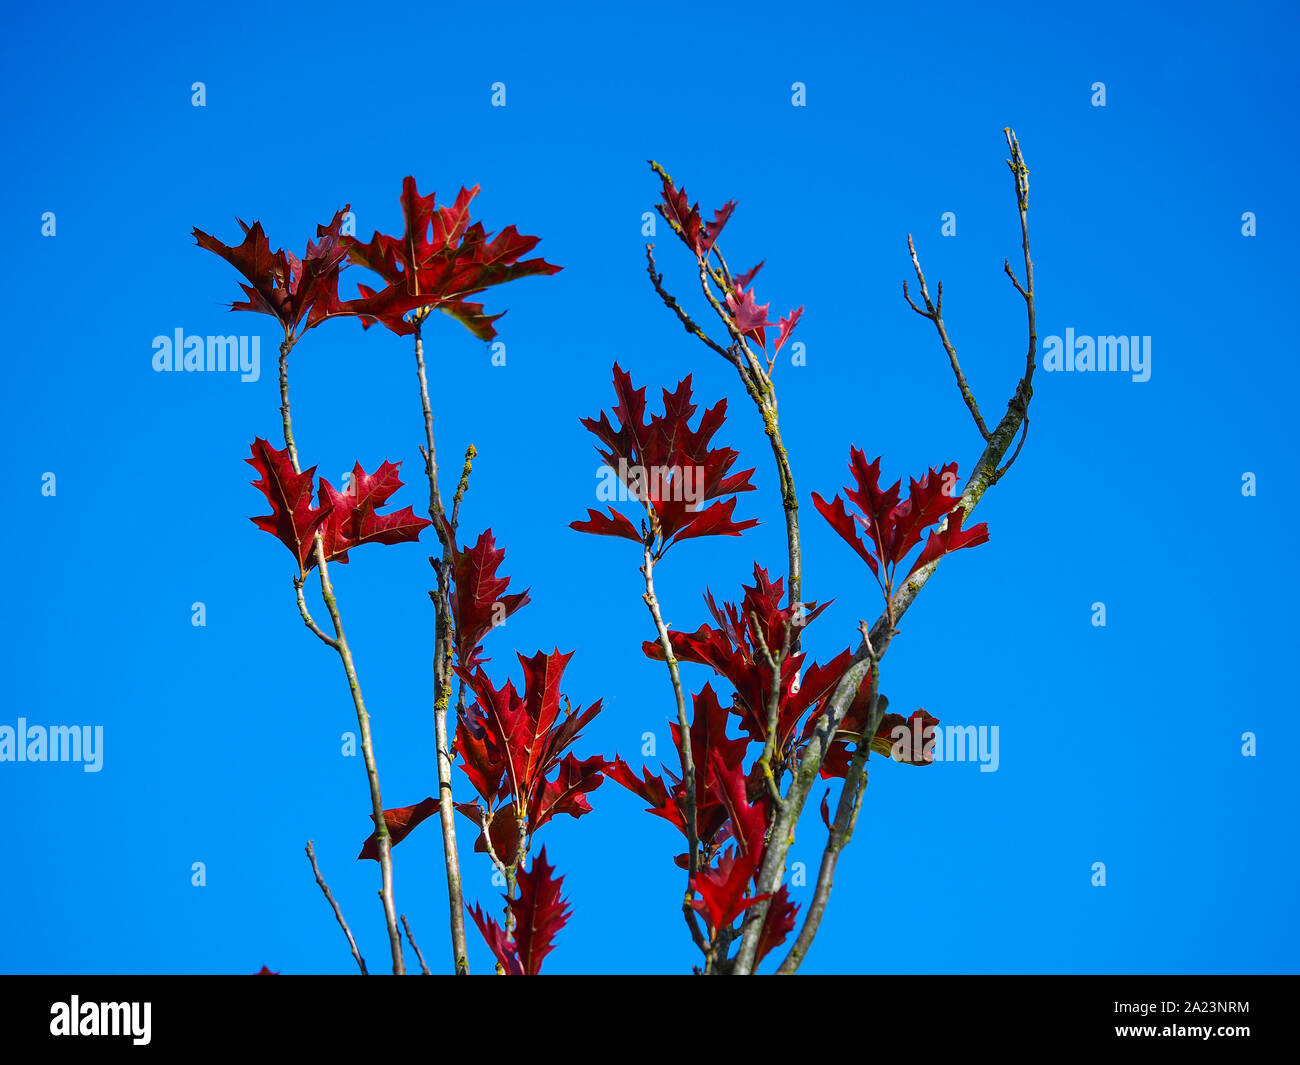 Beautiful red autumn leaves on the branches of a young oak tree (Quercus palustris) against a clear blue sky Stock Photo